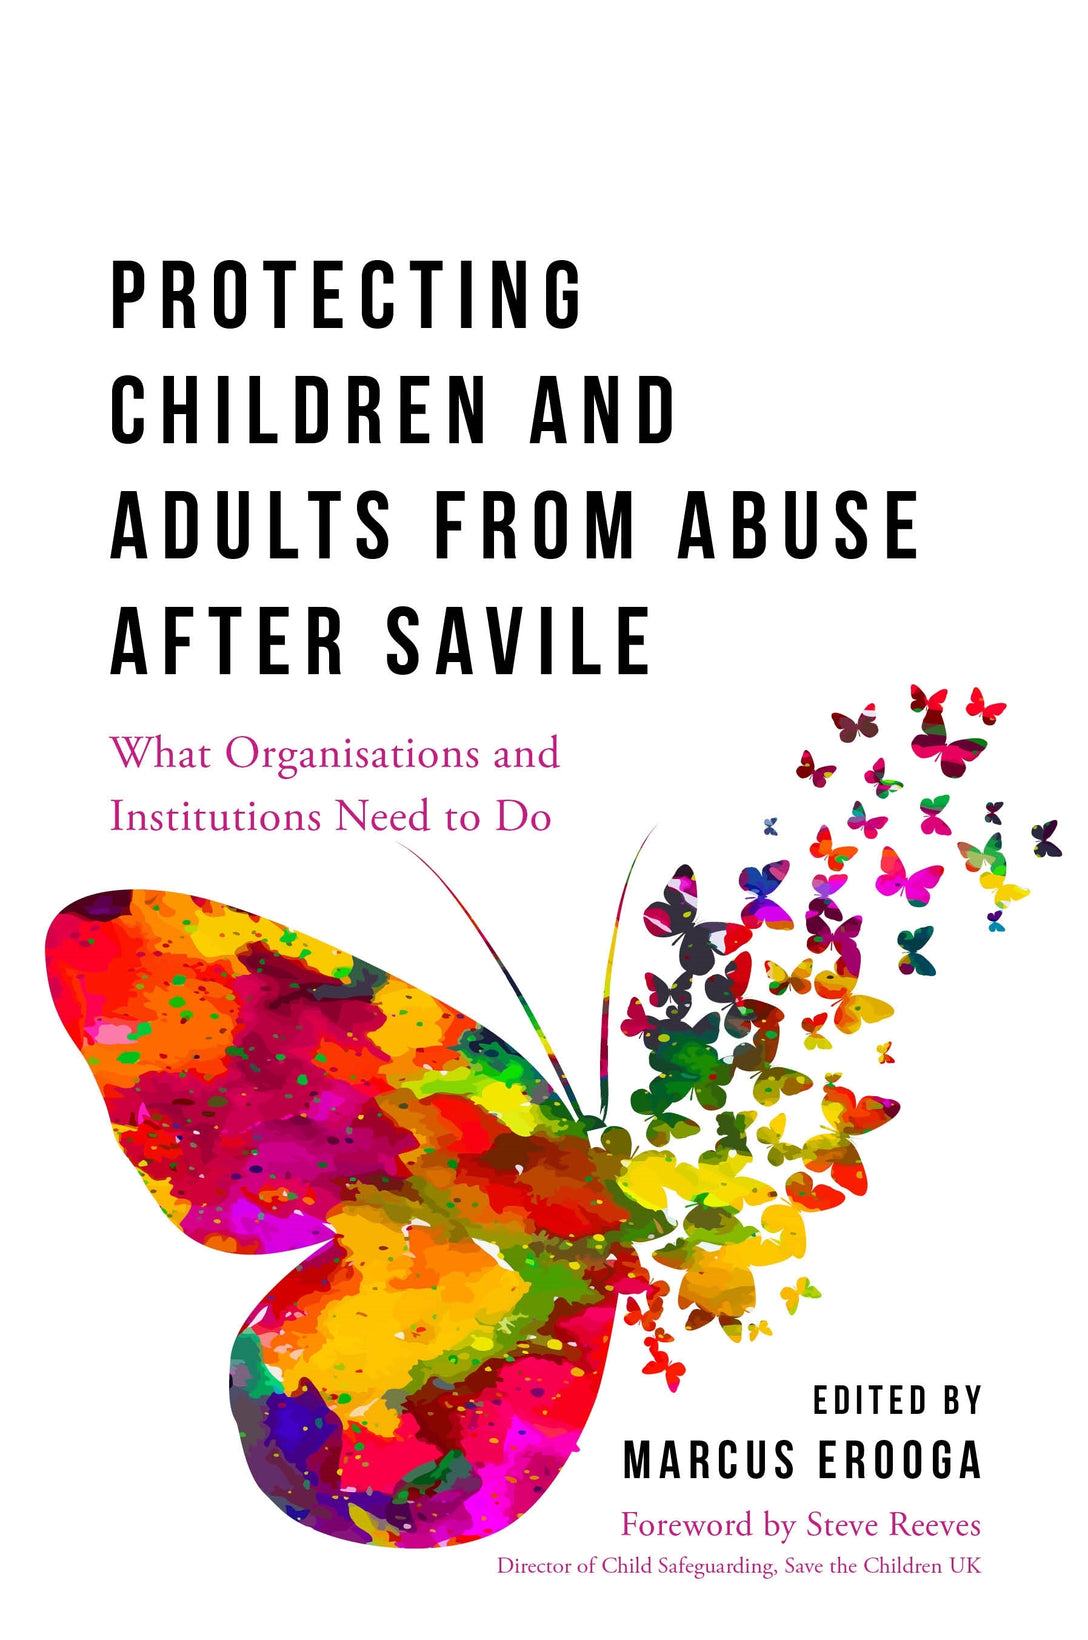 Protecting Children and Adults from Abuse After Savile by Marcus Erooga, No Author Listed